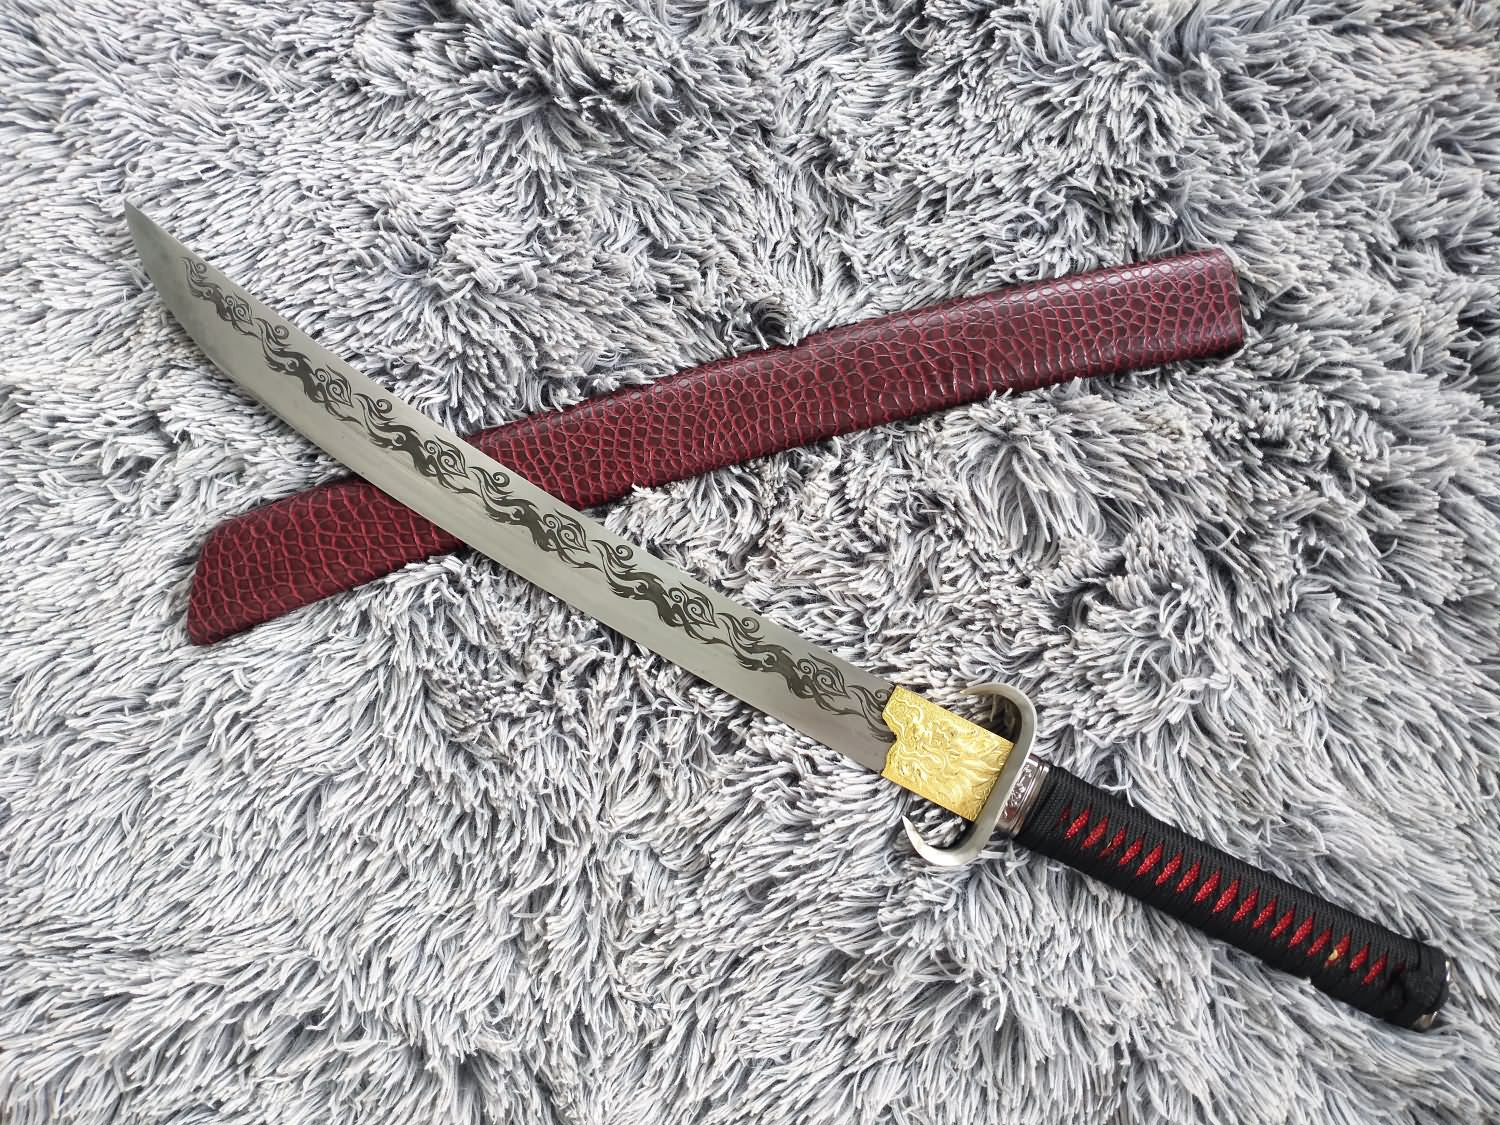 High Carbon Steel Etch Blade Chinese Handmade Sword, 27" Overall Length